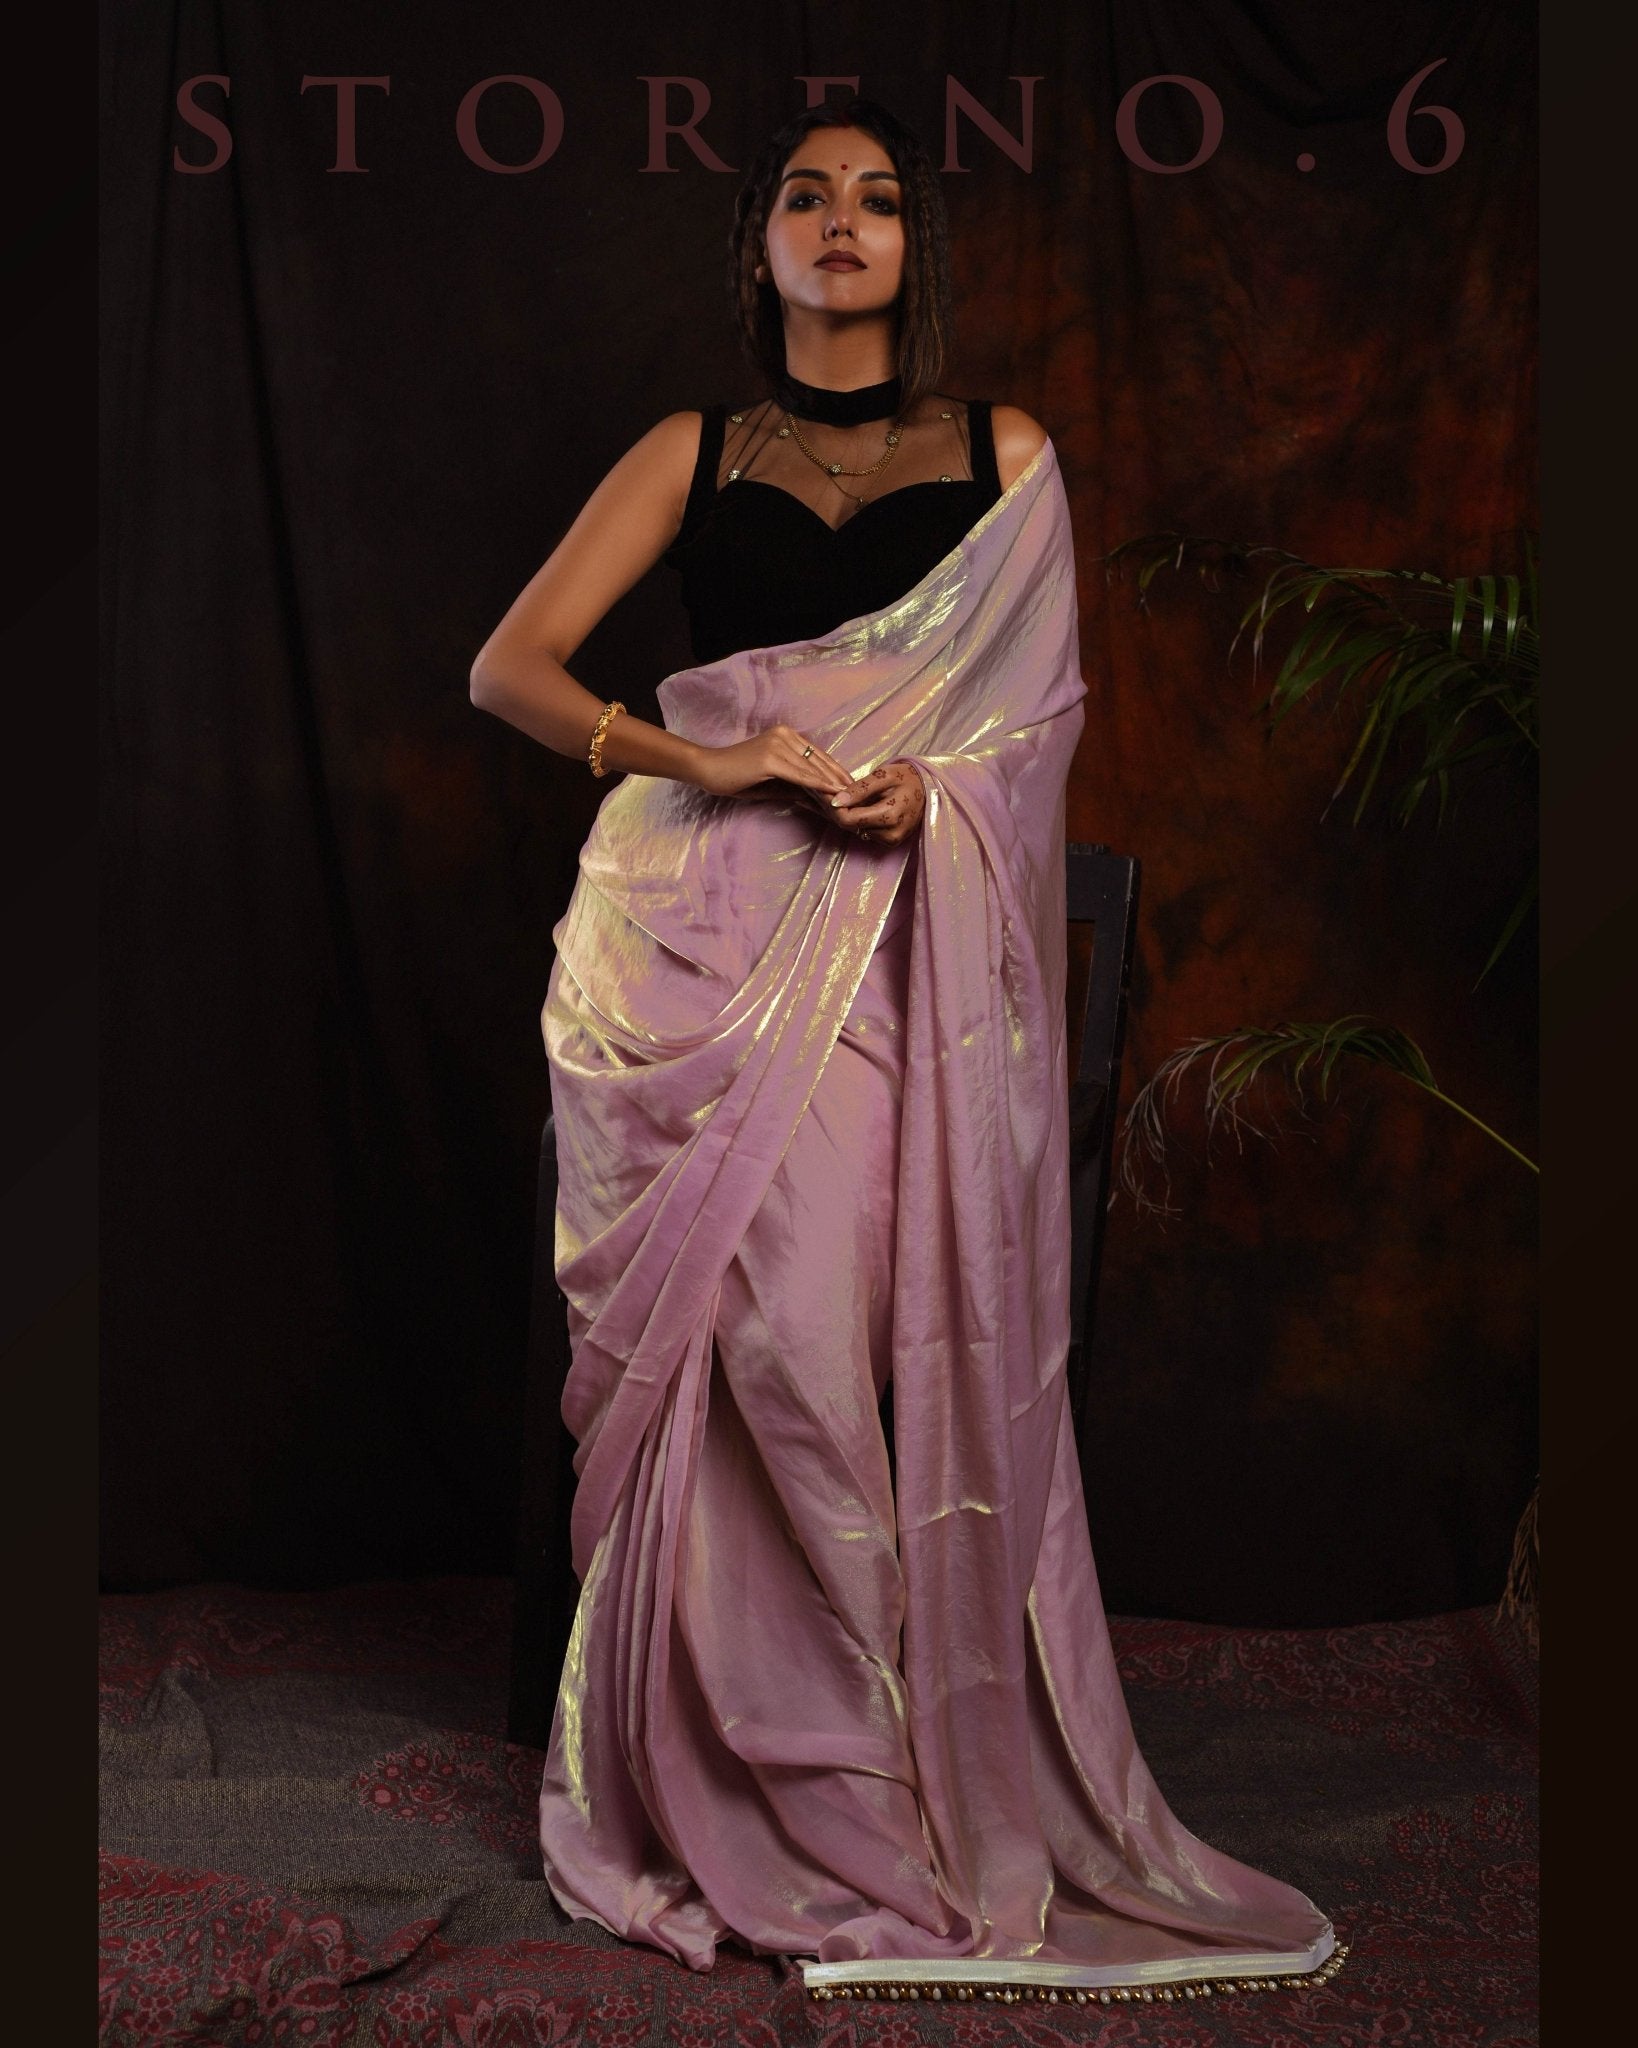 THE YOU MADE ME BLUSH SAREE WITH GOSSIP GIRL BLOUSE